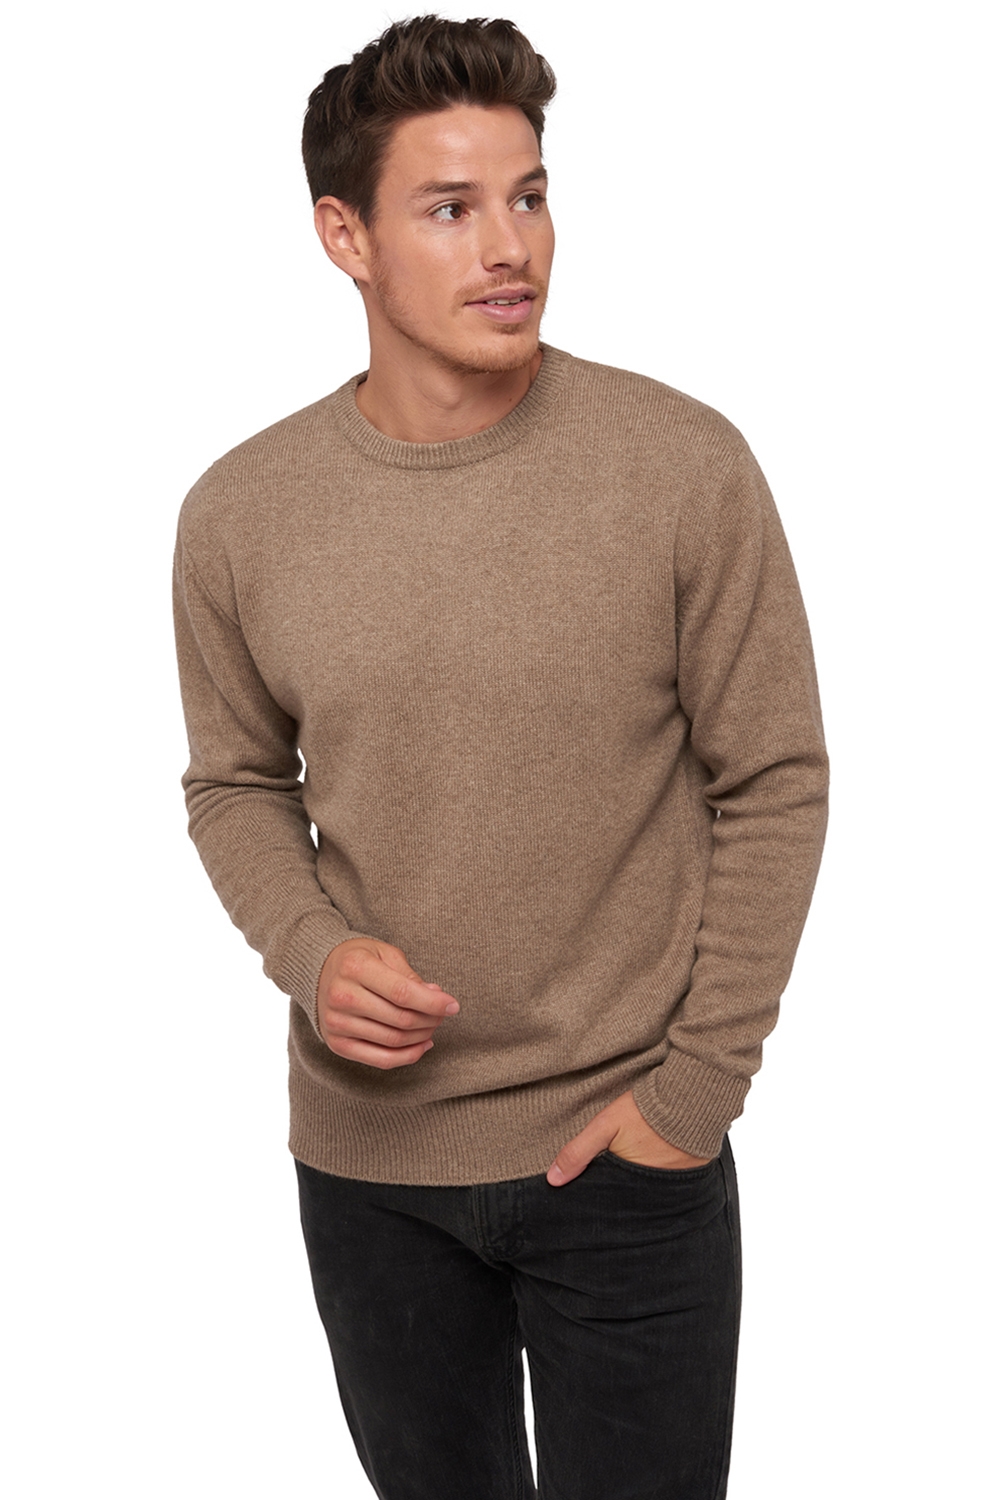 Cachemire Naturel pull homme natural ness 4f natural brown 2xl